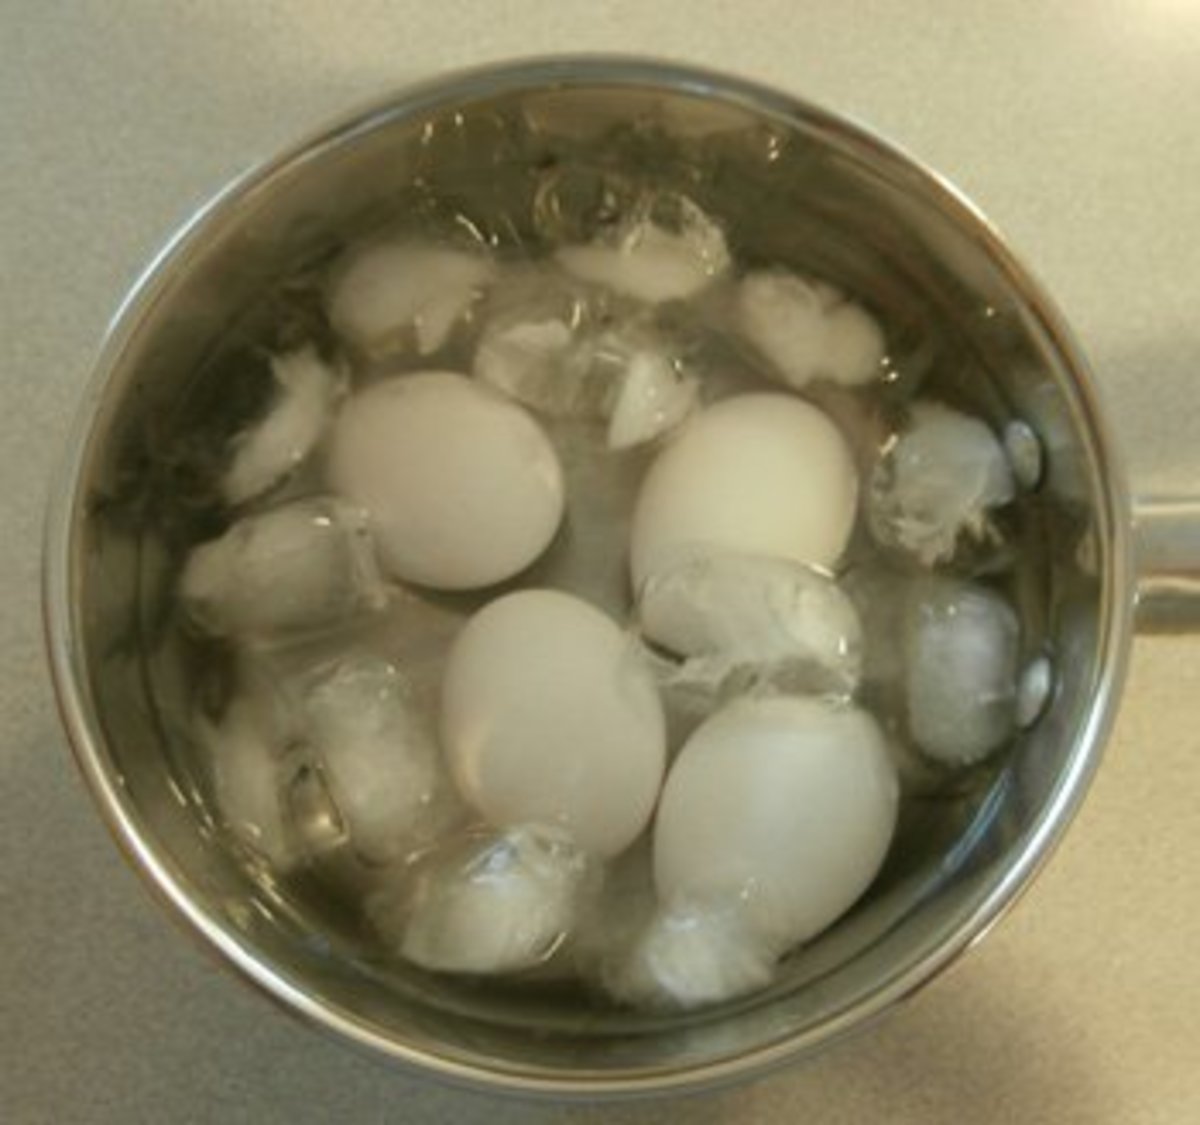 Cool eggs in ice cold water as soon as they're finished cooking.